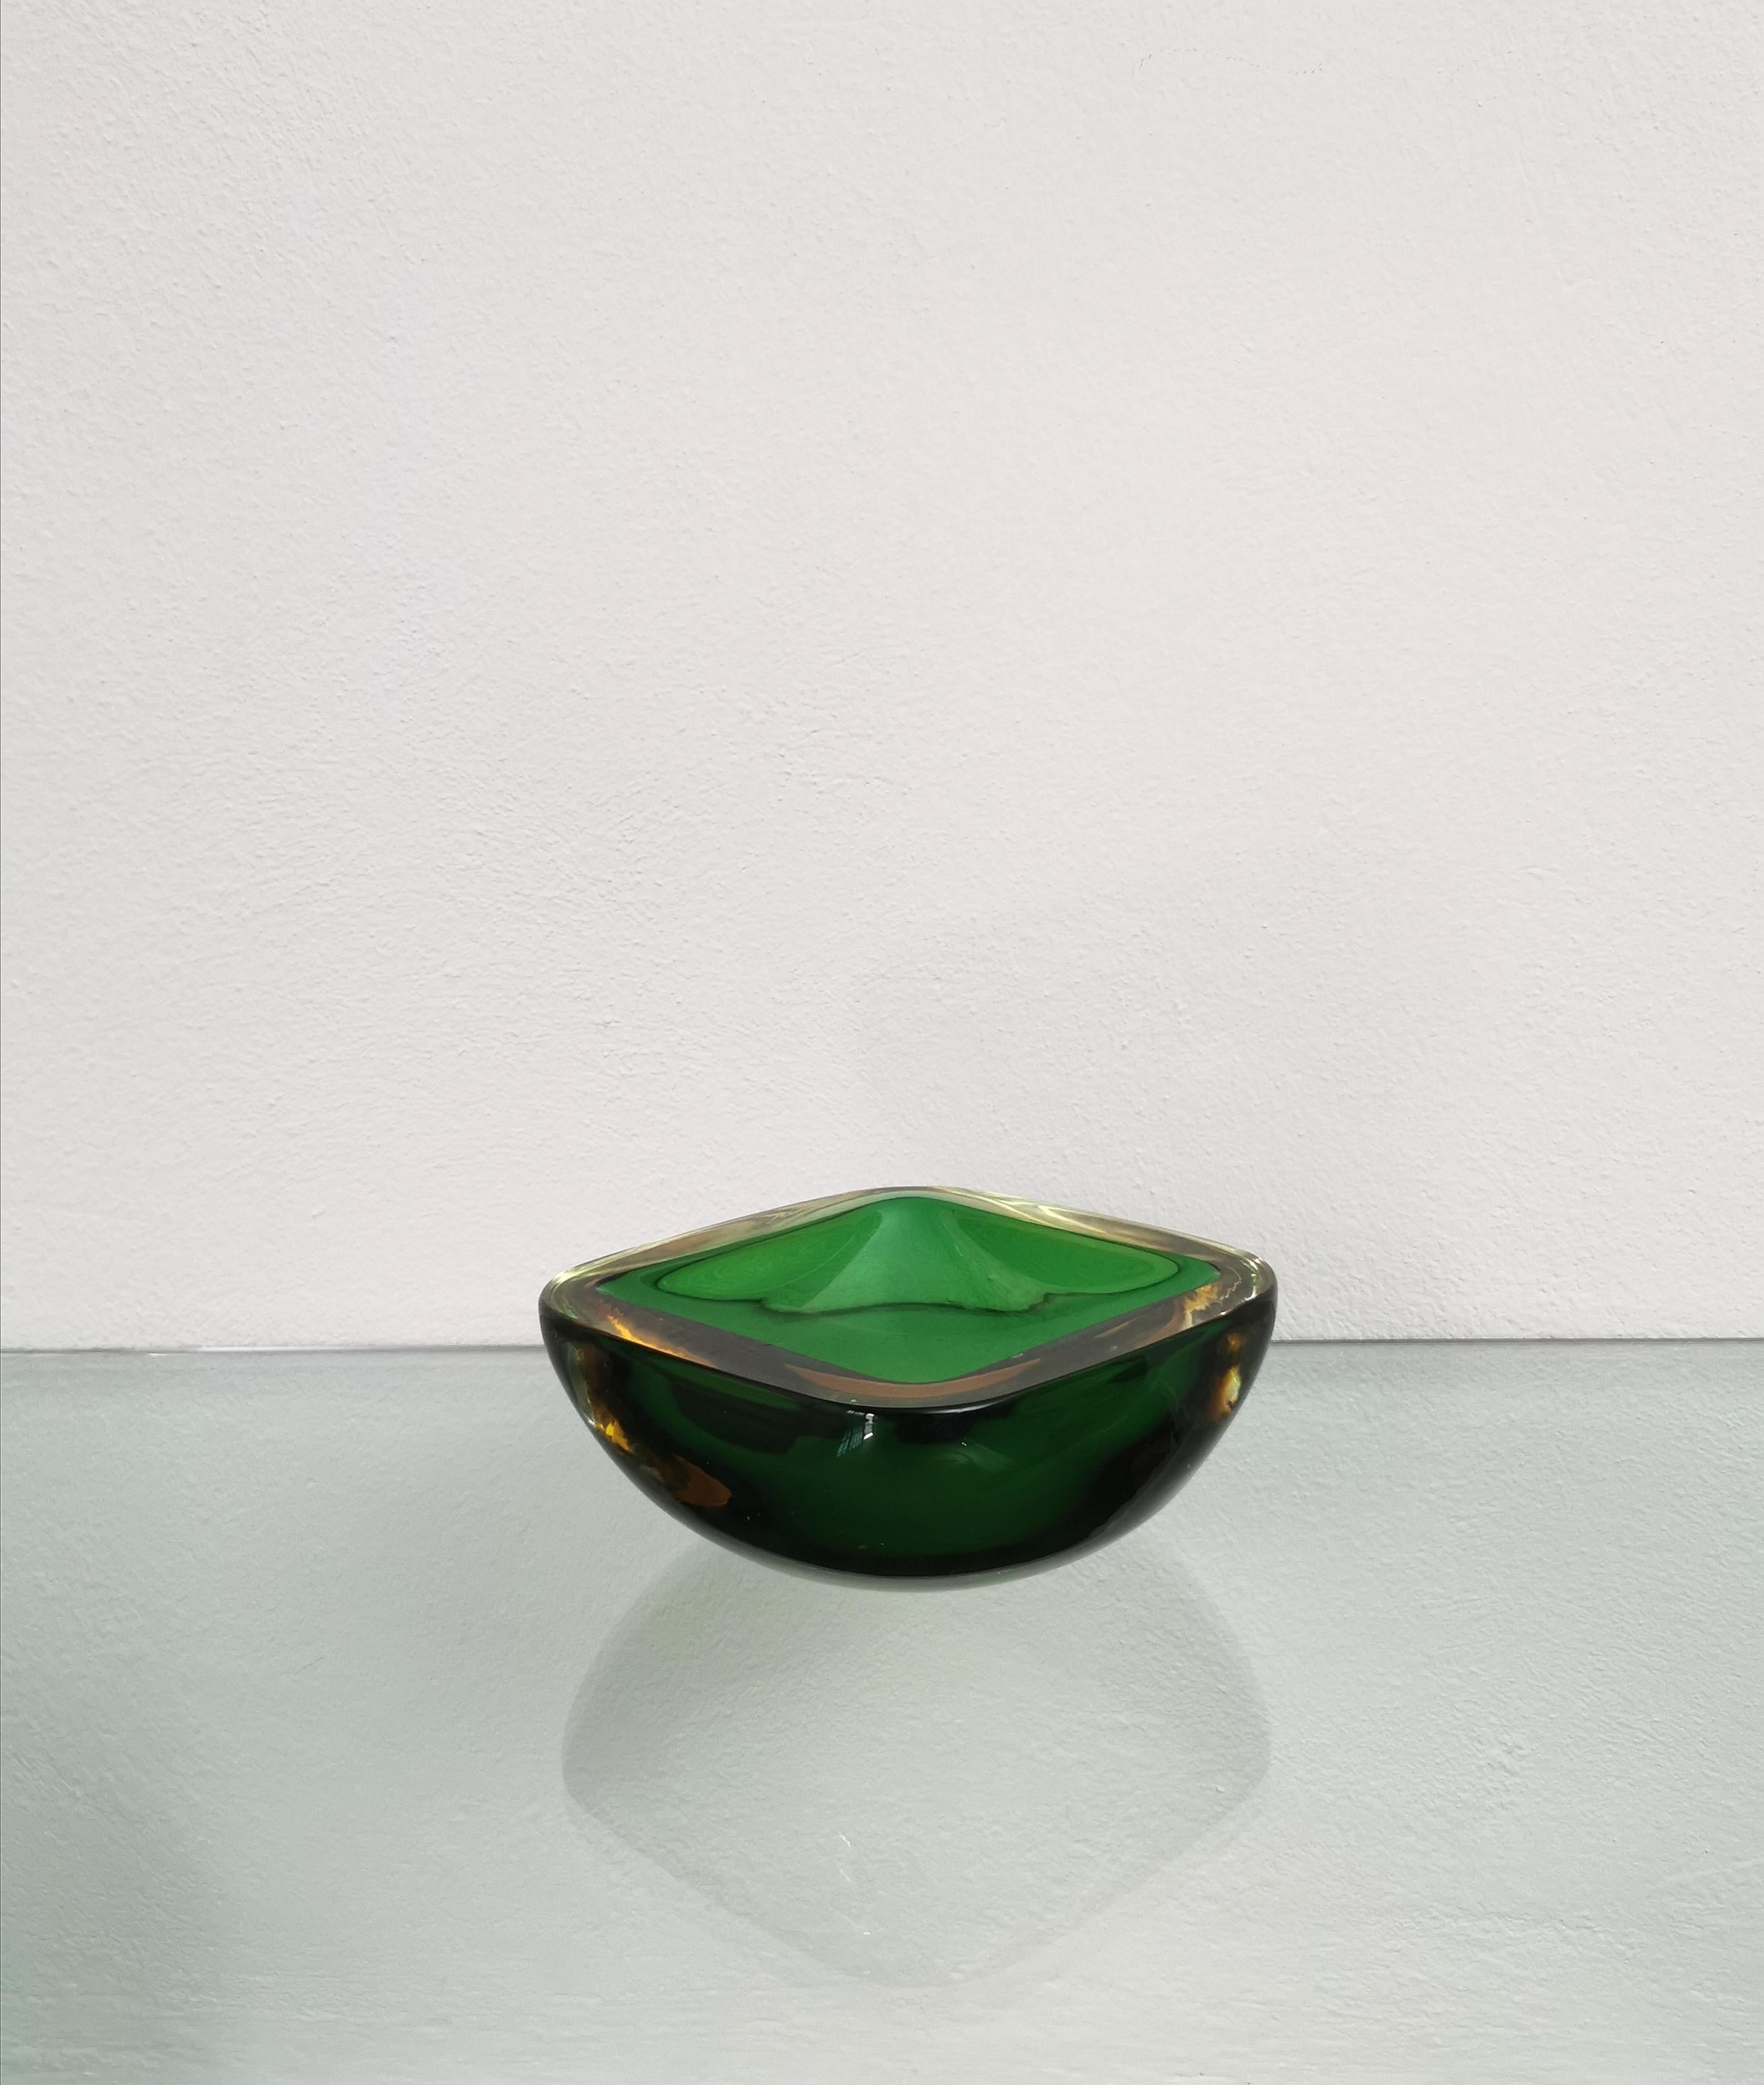 Square-shaped pocket emptier designed in the style of Flavio Poli produced in Italy in the 70s.
the pocket emptier was made of Murano glass with the famous sommerso technique and with the particular combination of bright colors in shades of green